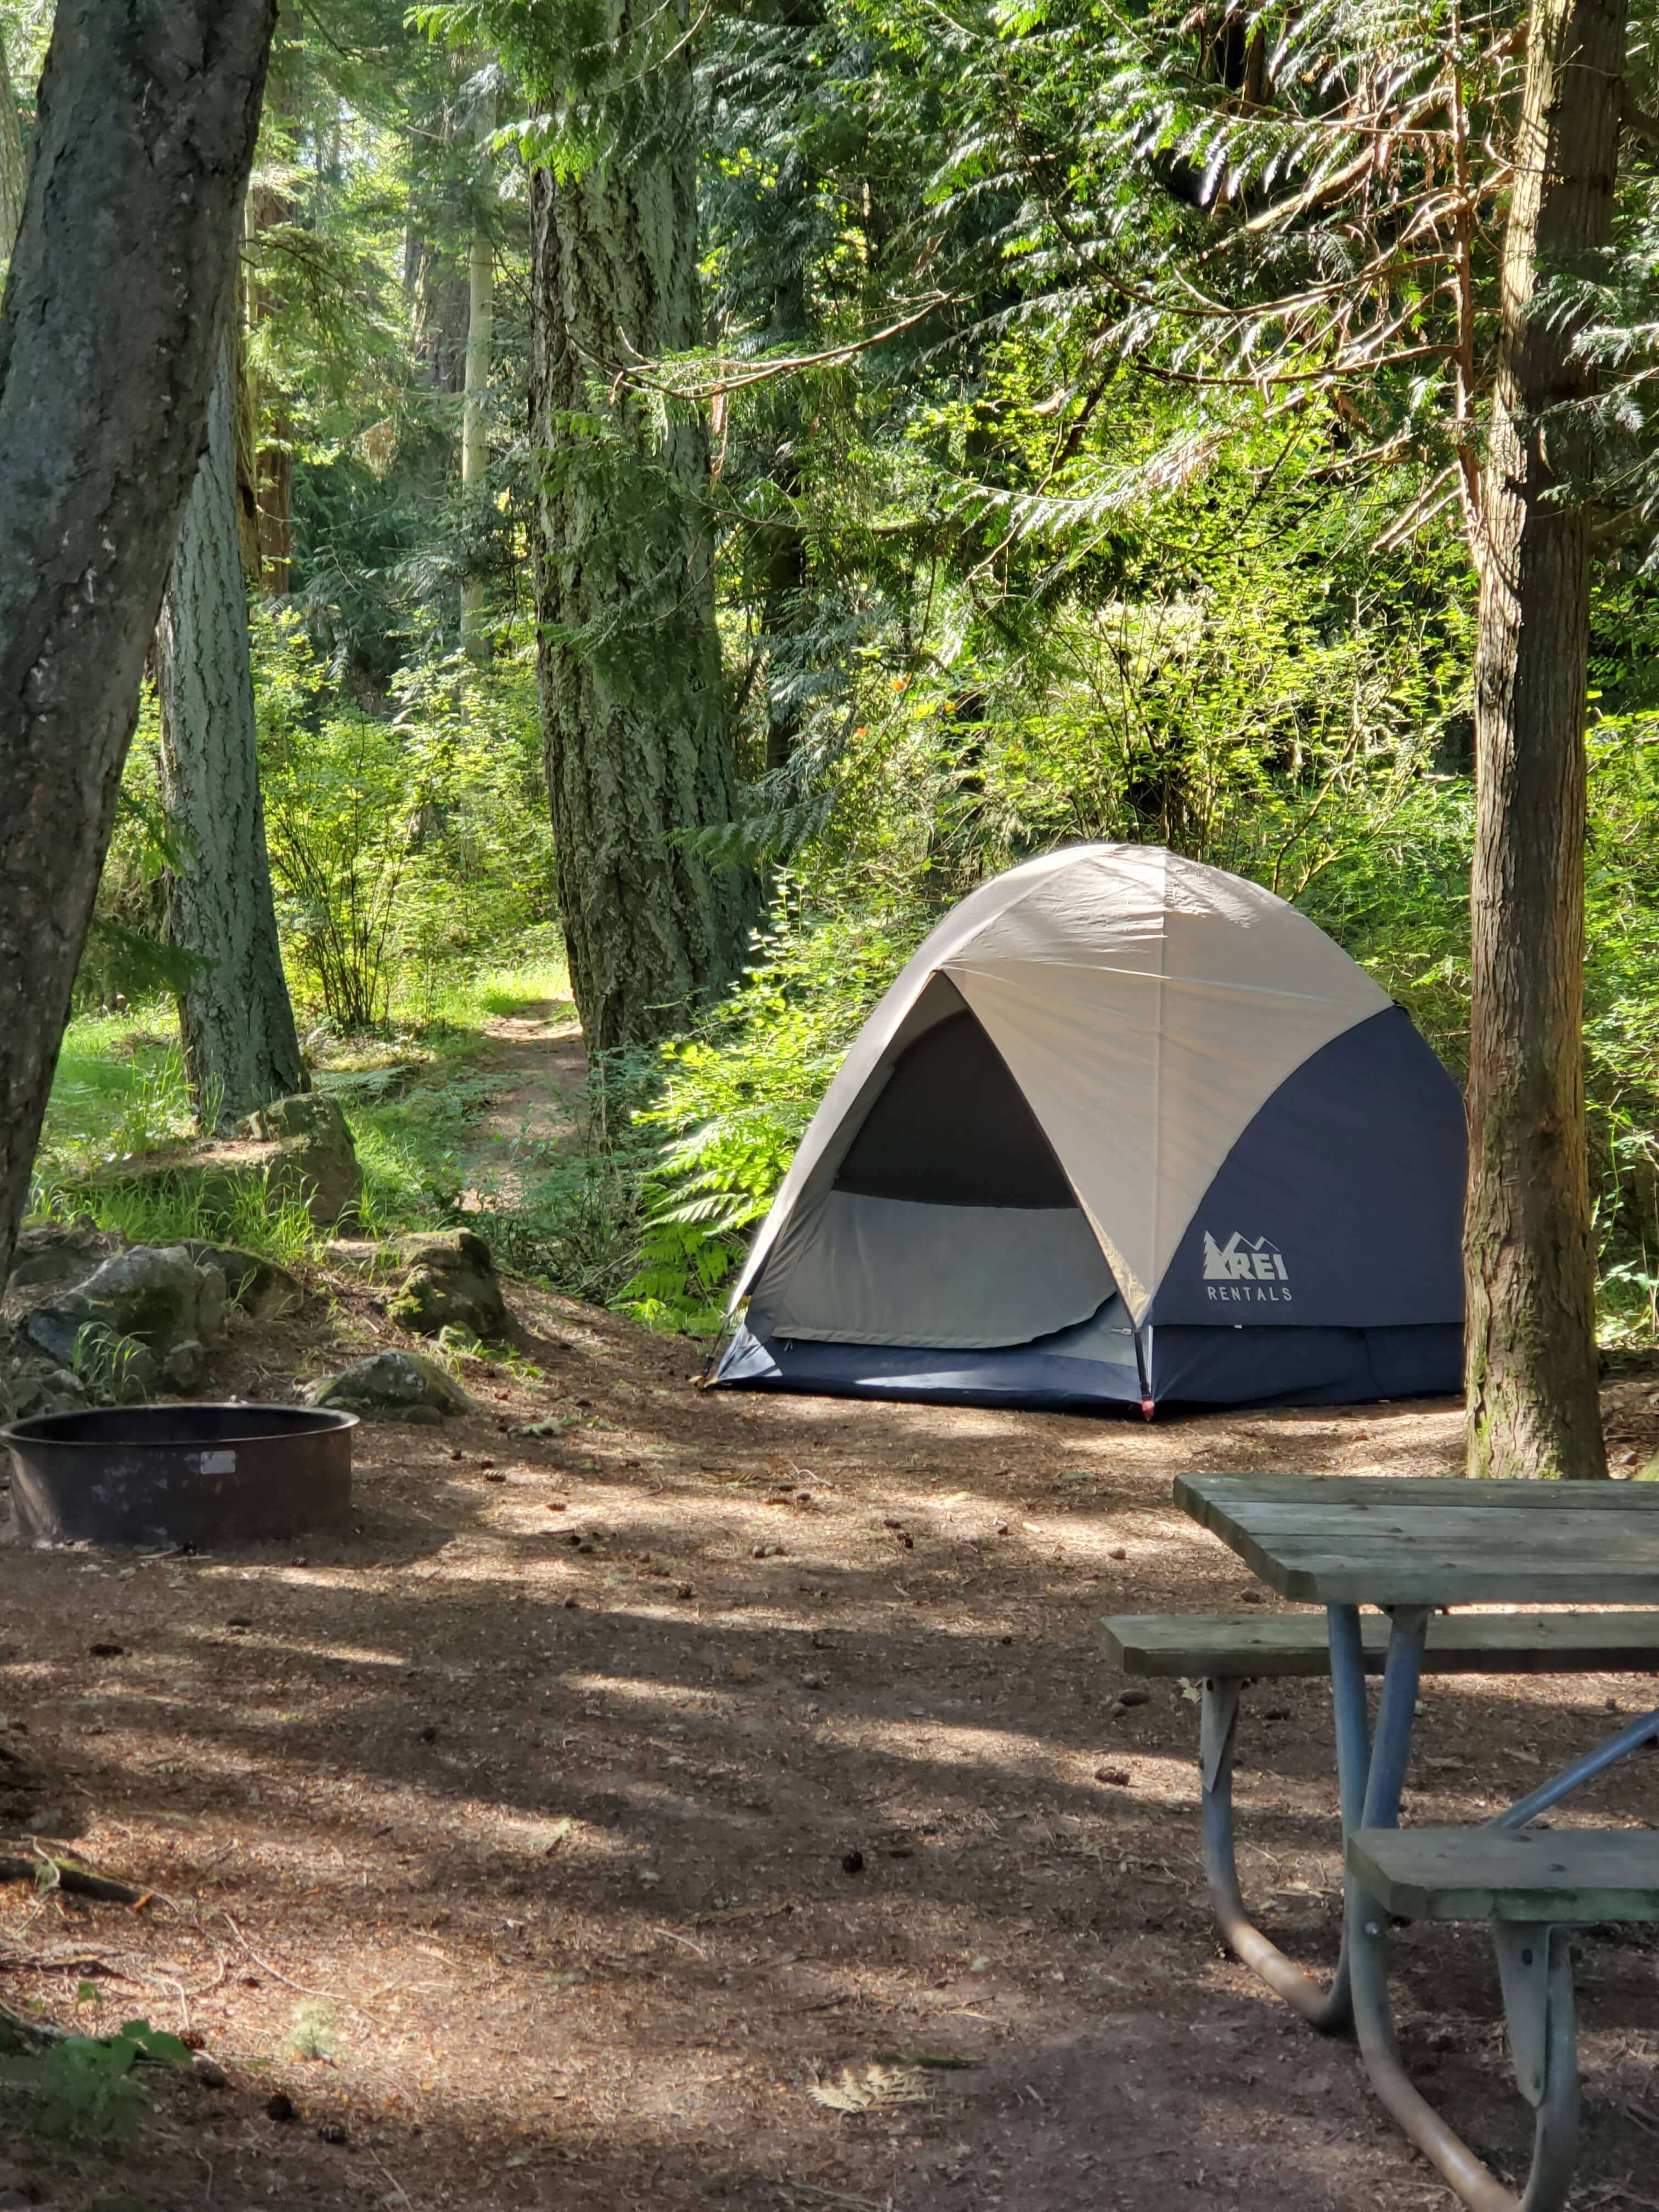 An REI-branded rental tent set up at a campsite